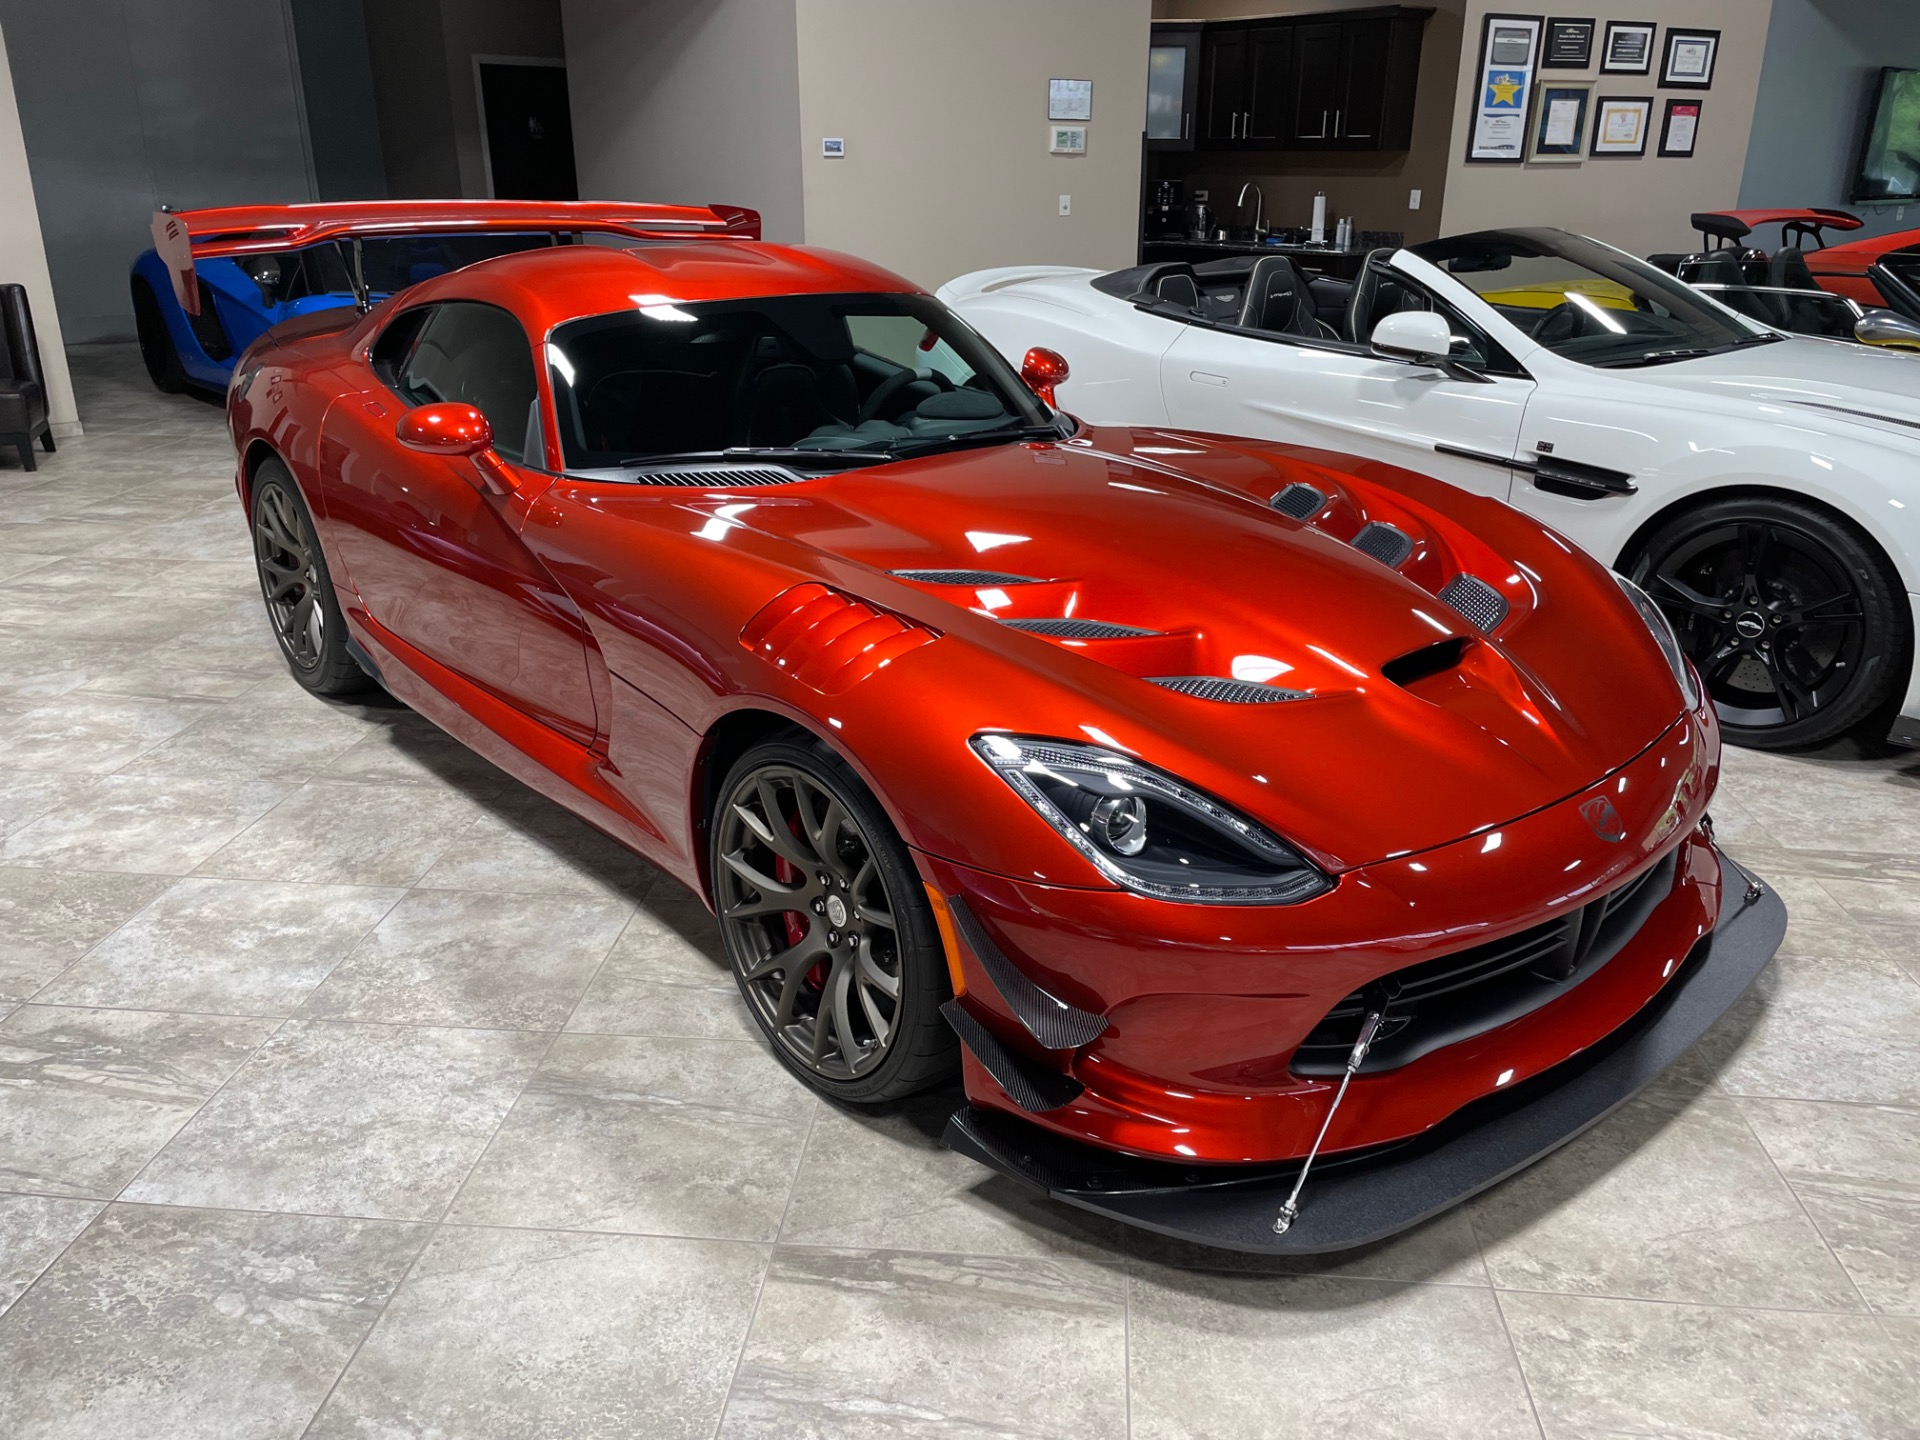 Used-2016-Dodge-Viper-ACR-Extreme-Aero-Coupe-Only-1k-Miles-Stryker-Orange-Tri-Coat-BEST-ONE